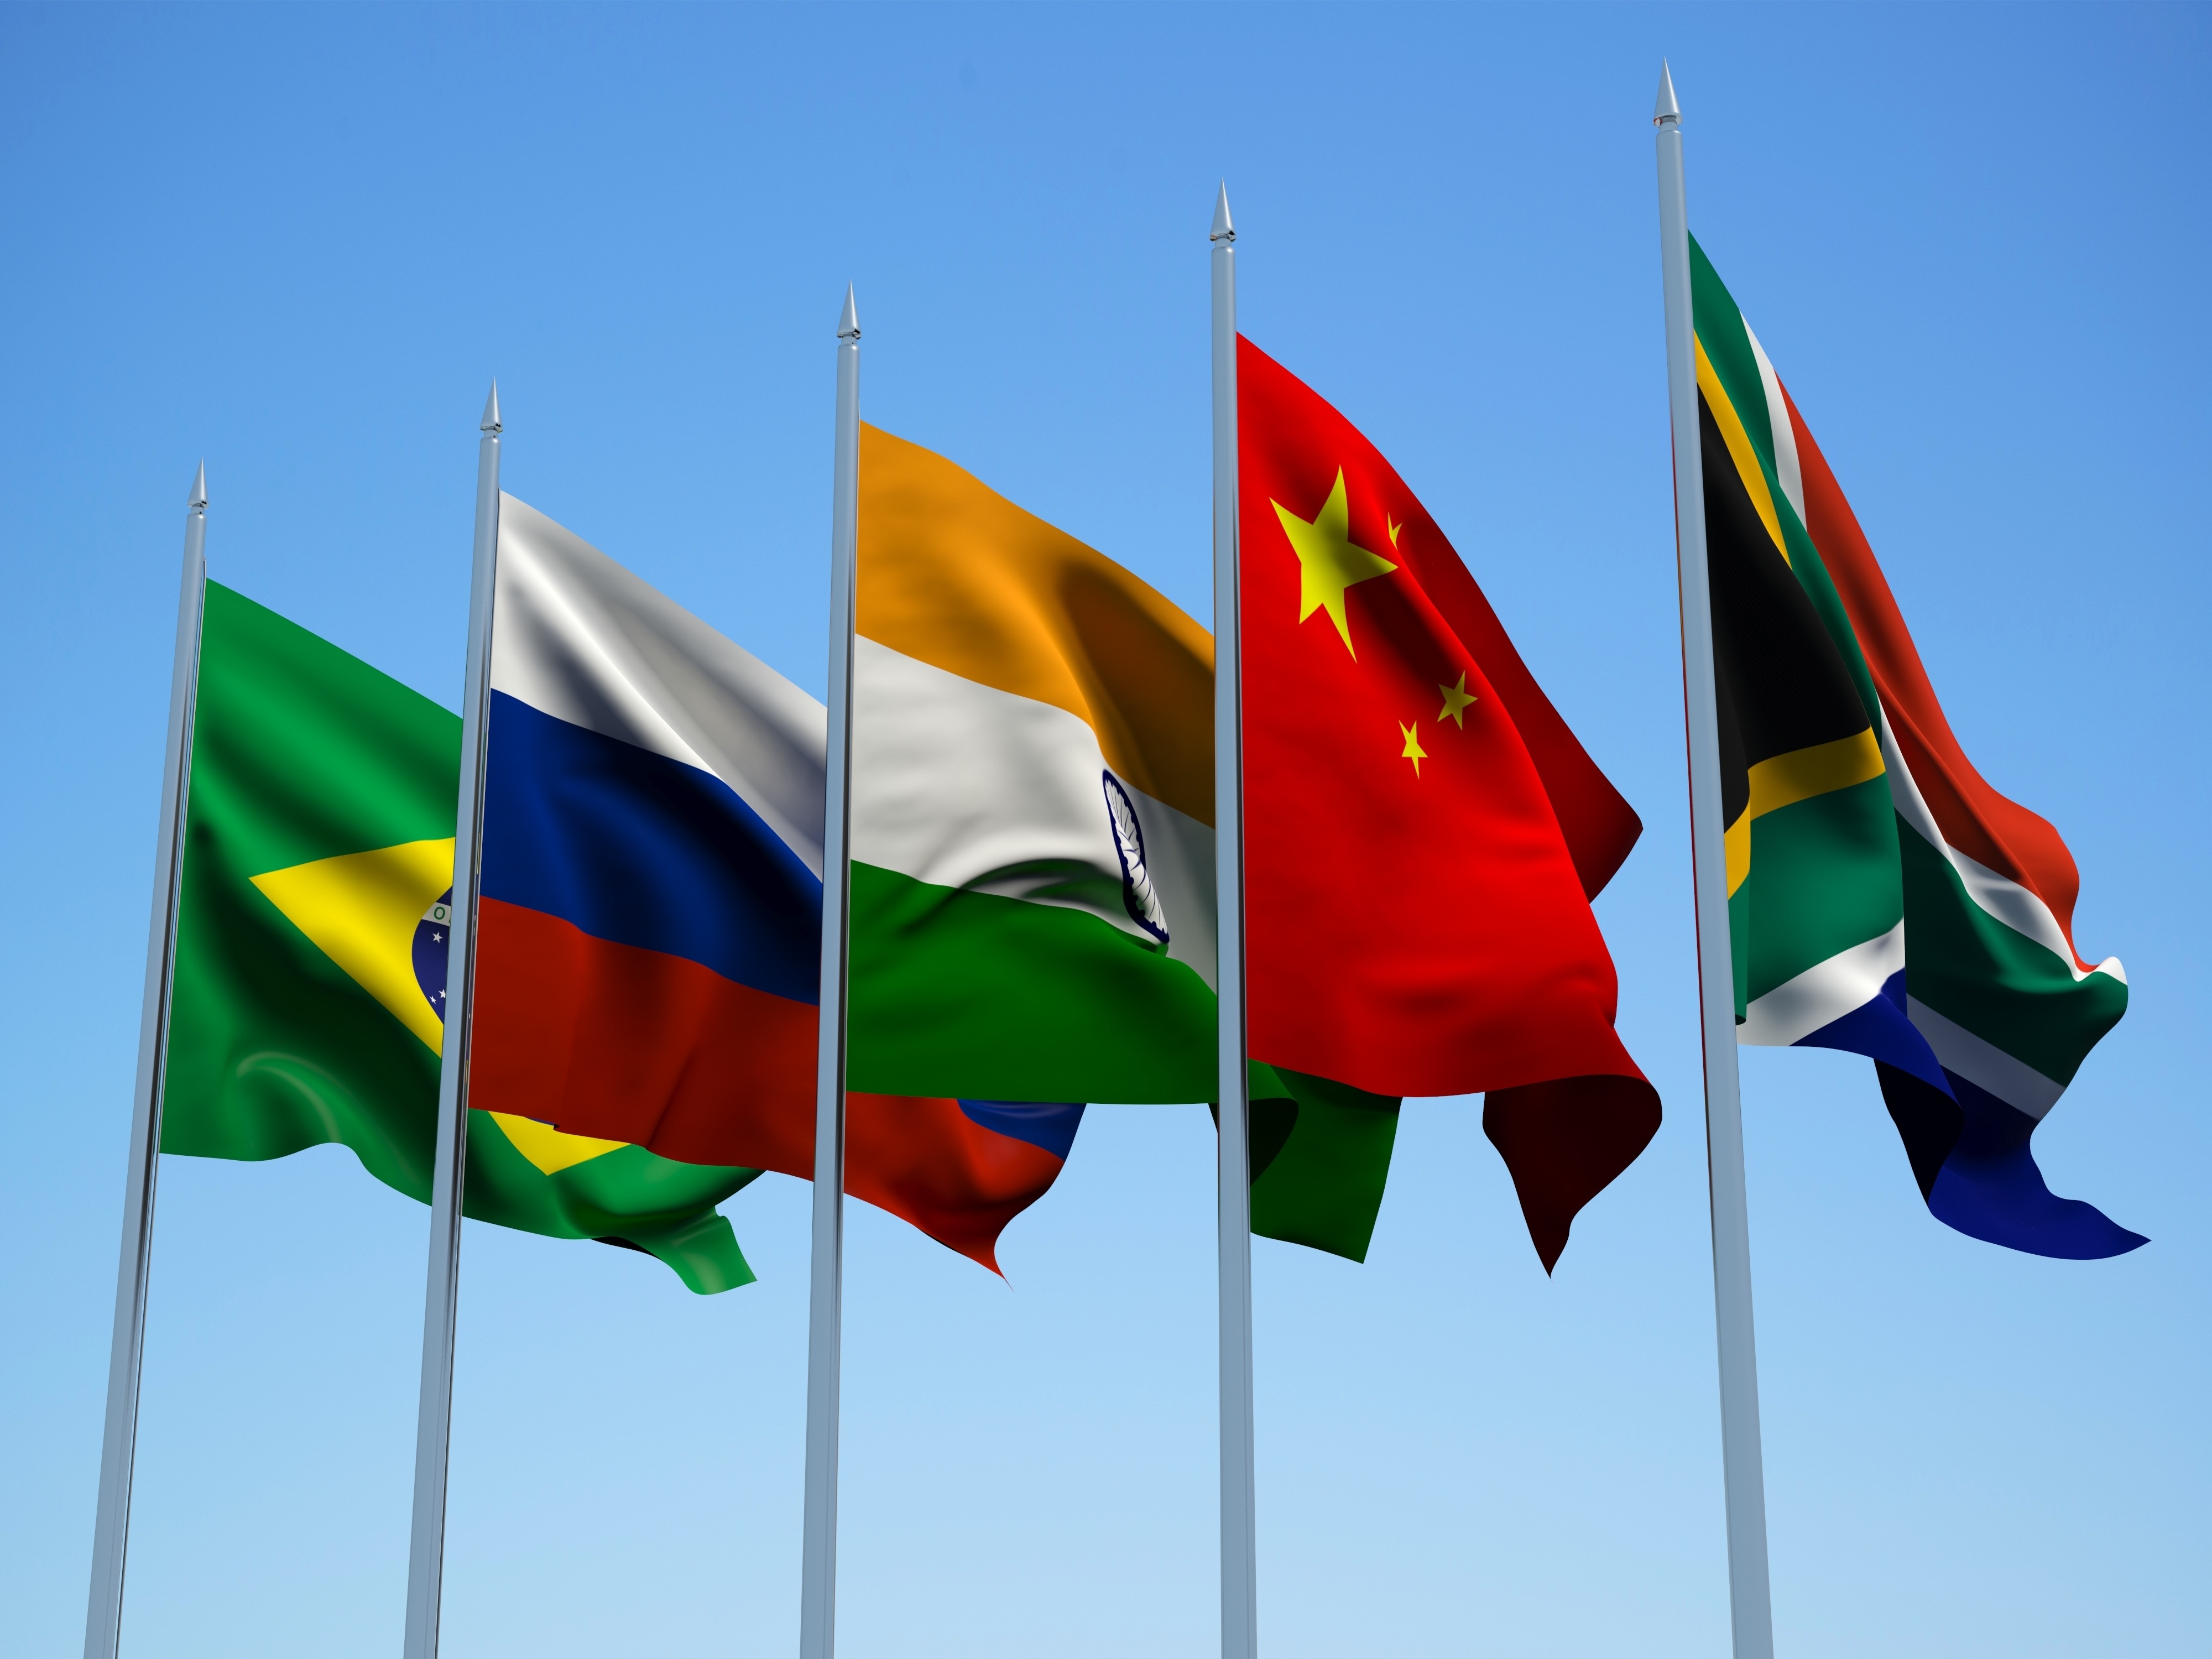 BRICS is a group formed by Brazil, Russia, India, China, and South Africa.